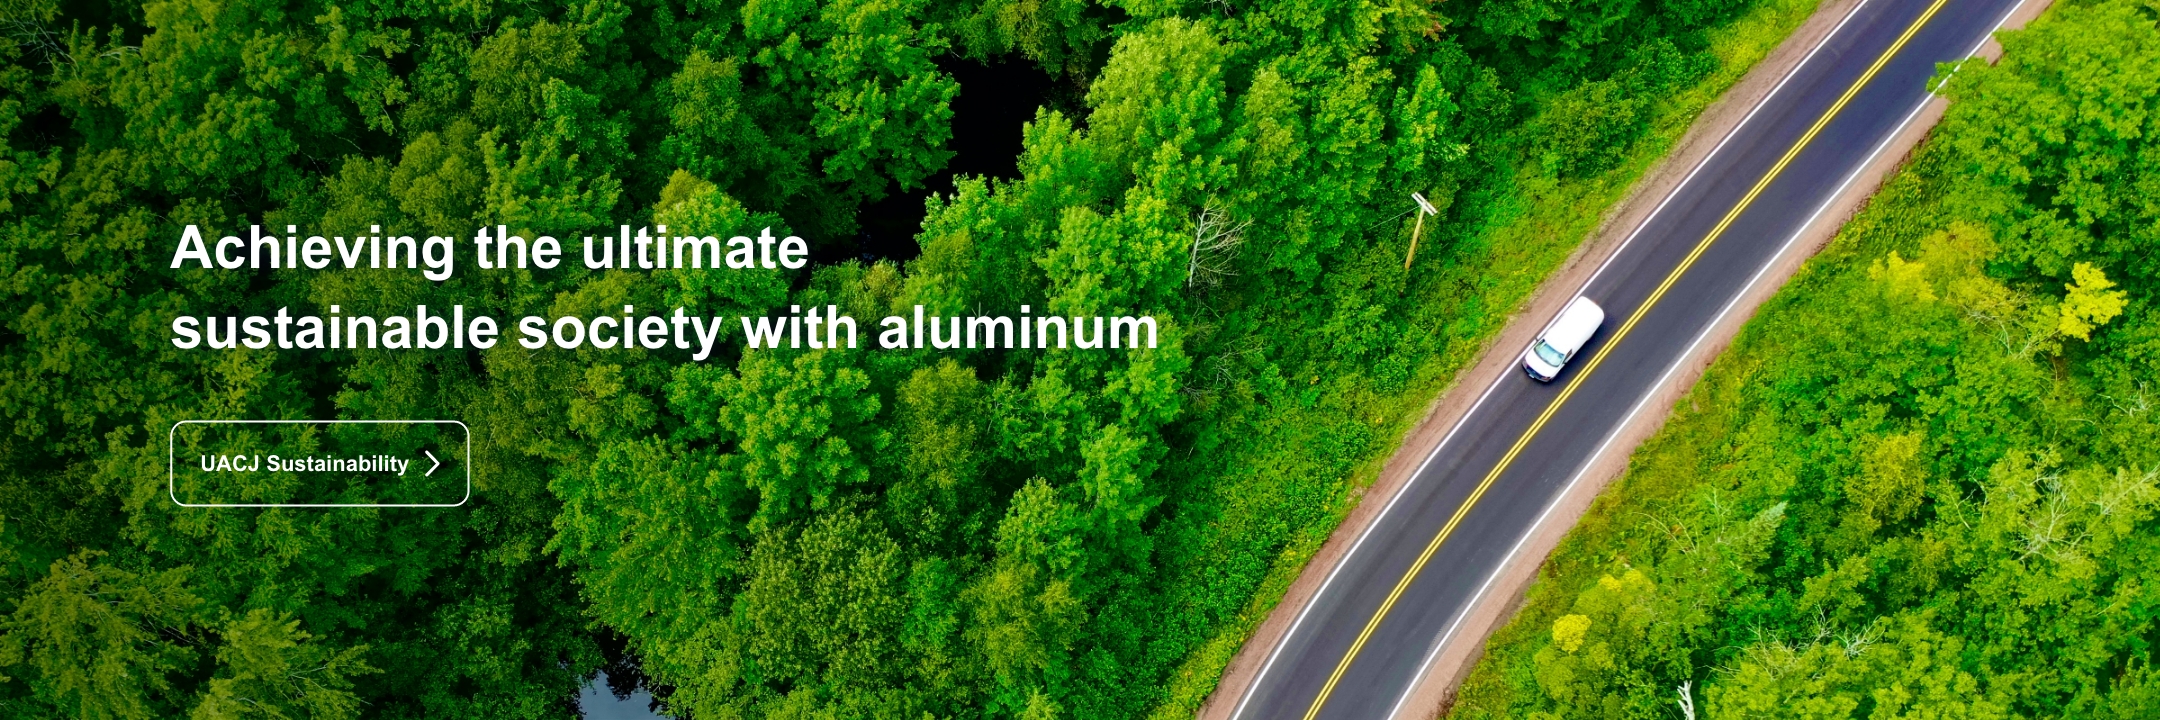 Achieving the ultimate sustainable society with aluminum